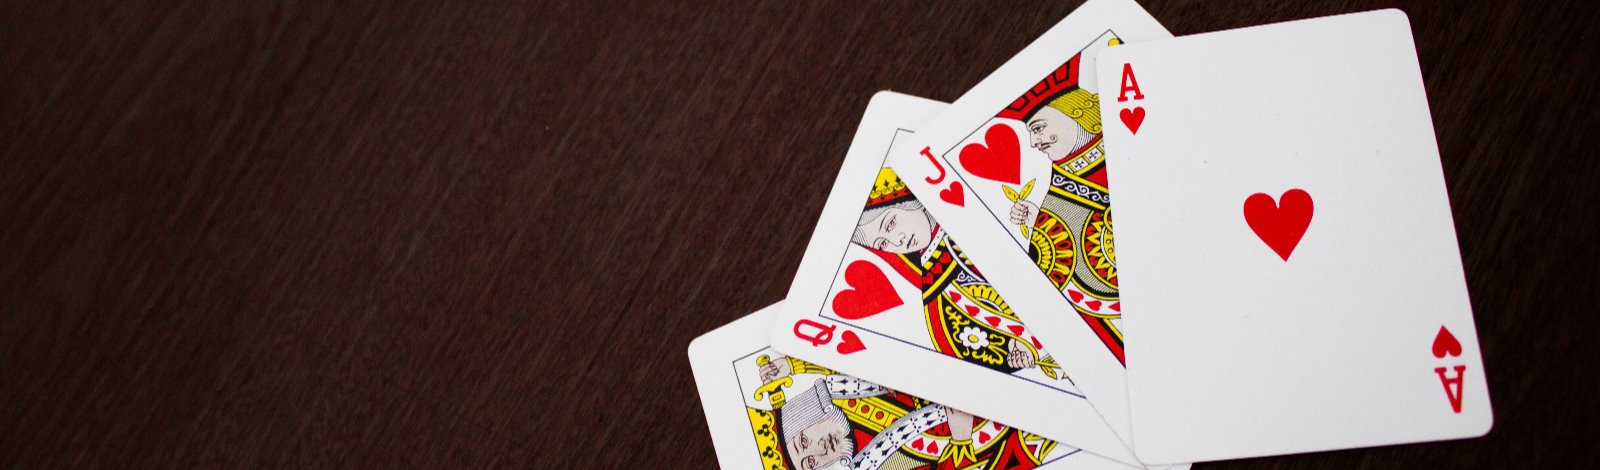 ace, king, queen and jack of hearts cards